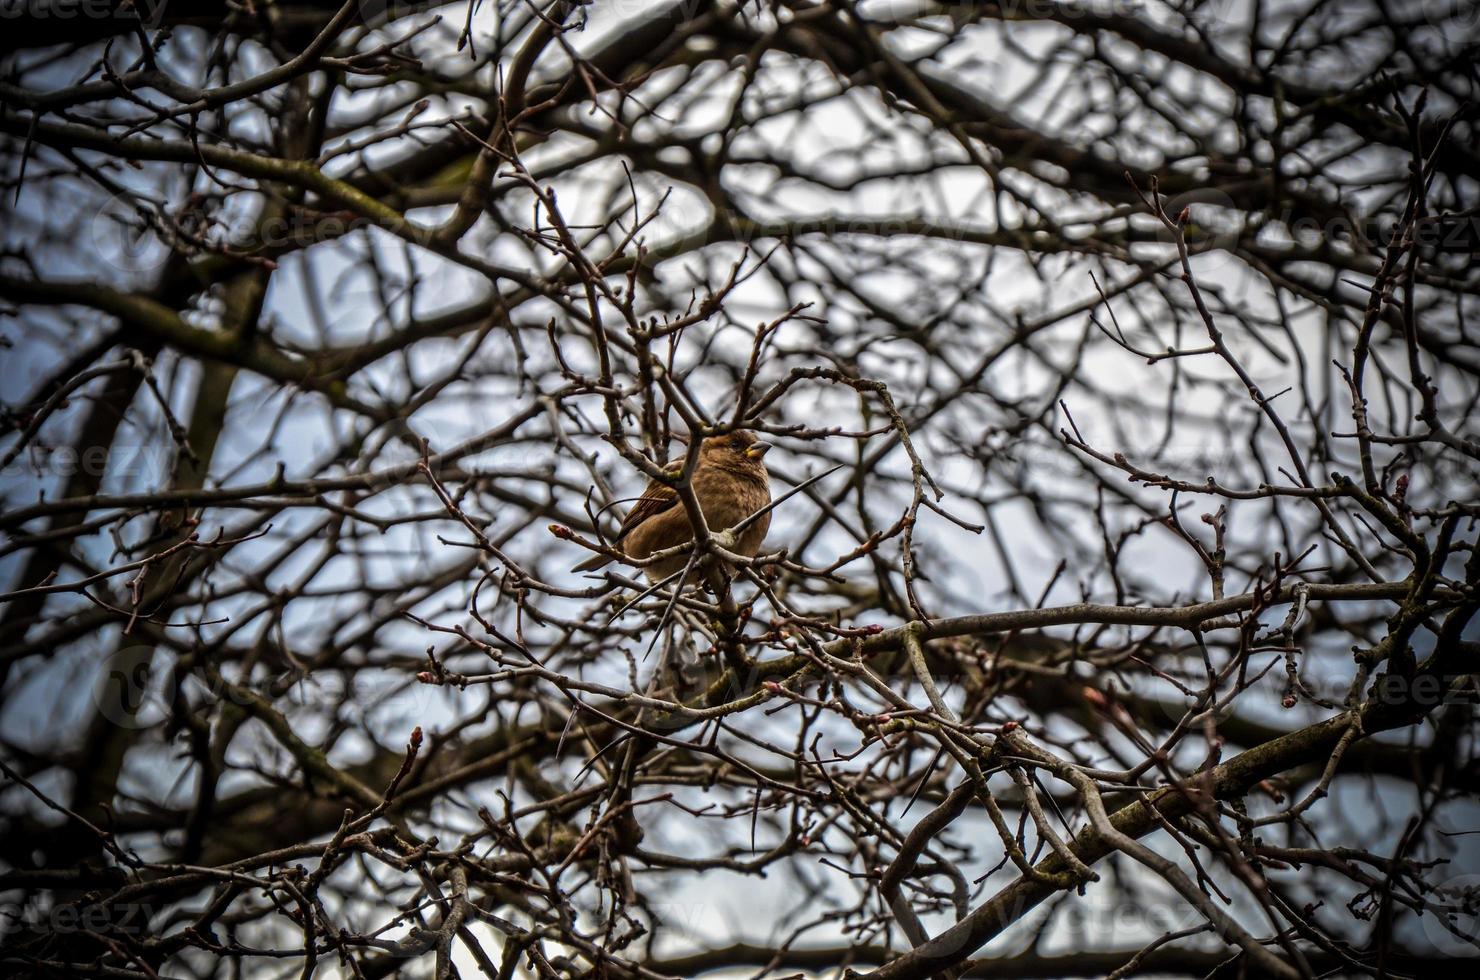 The field Sparrow sitting on a branch on background photo